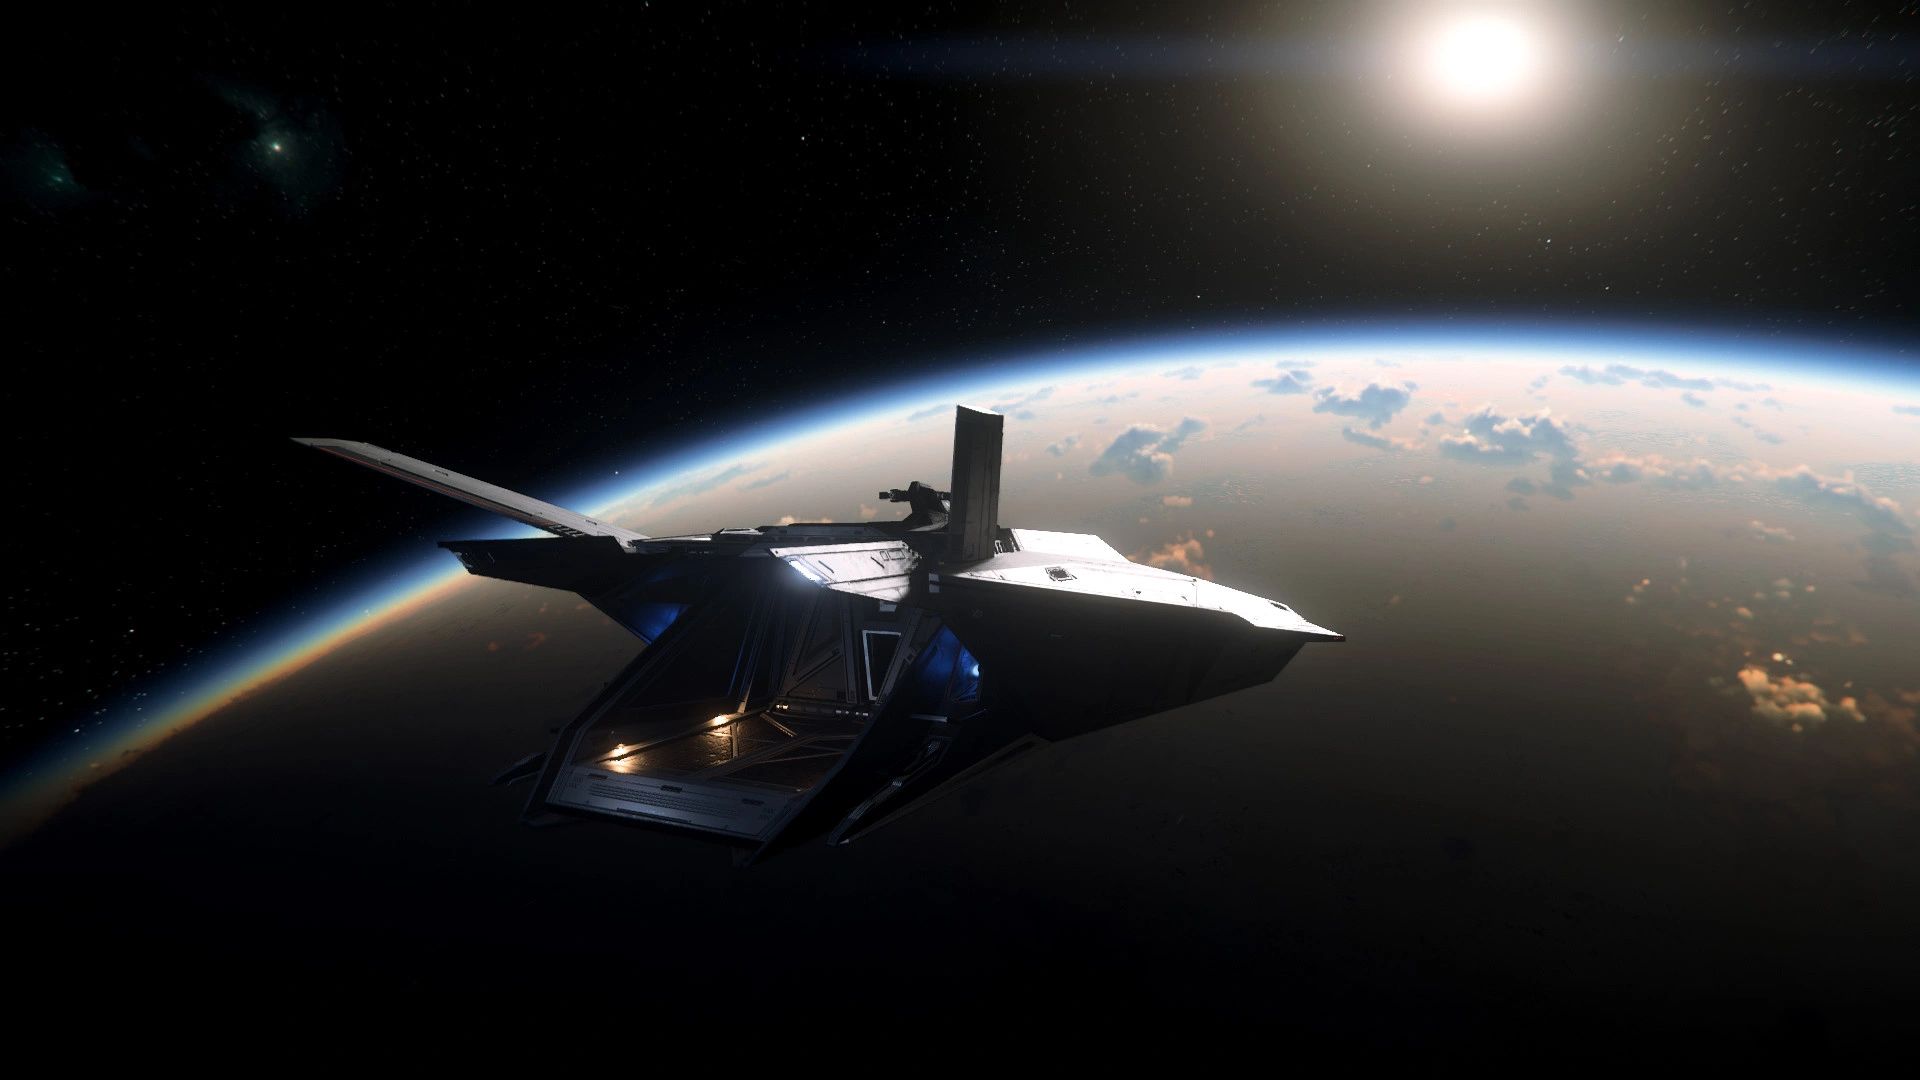 Star Citizen Release Date(and a Few Other Facts) - Tech Junkie